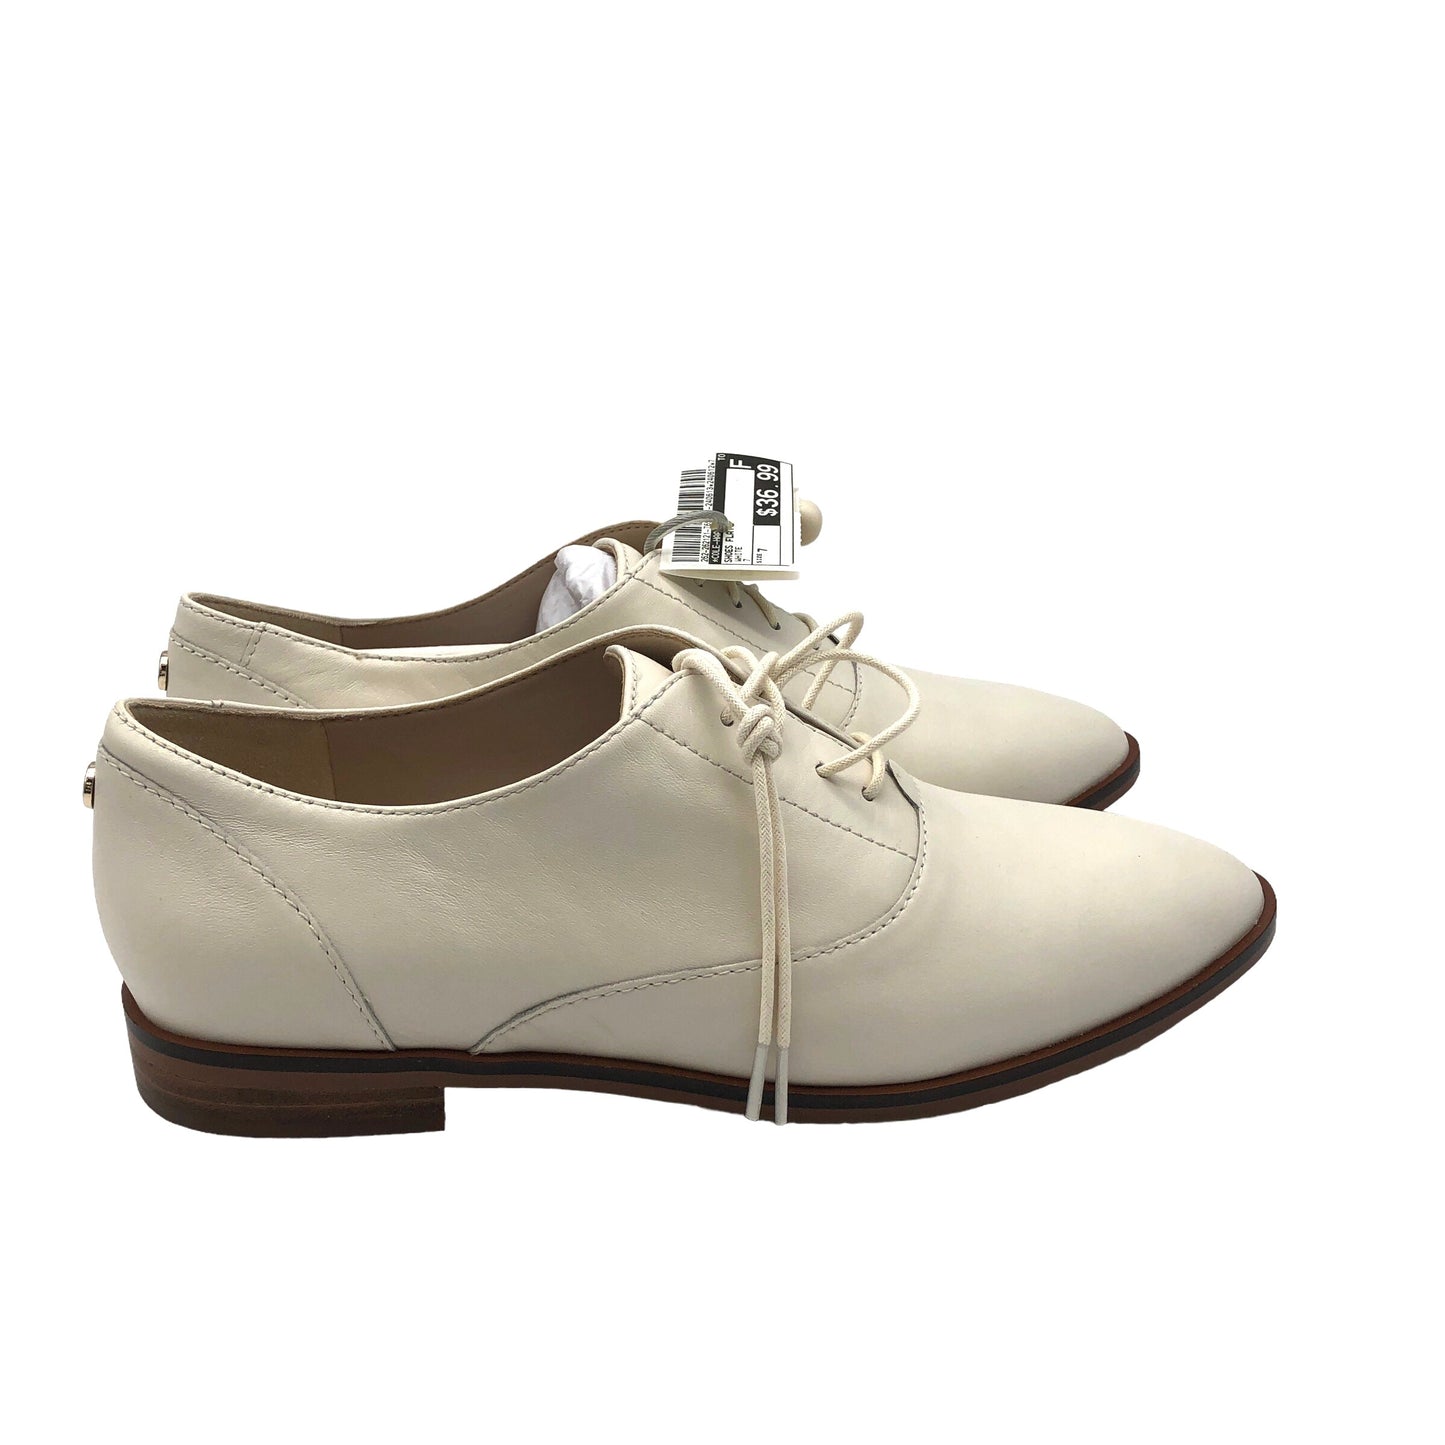 White Shoes Flats Cole-haan, Size 7